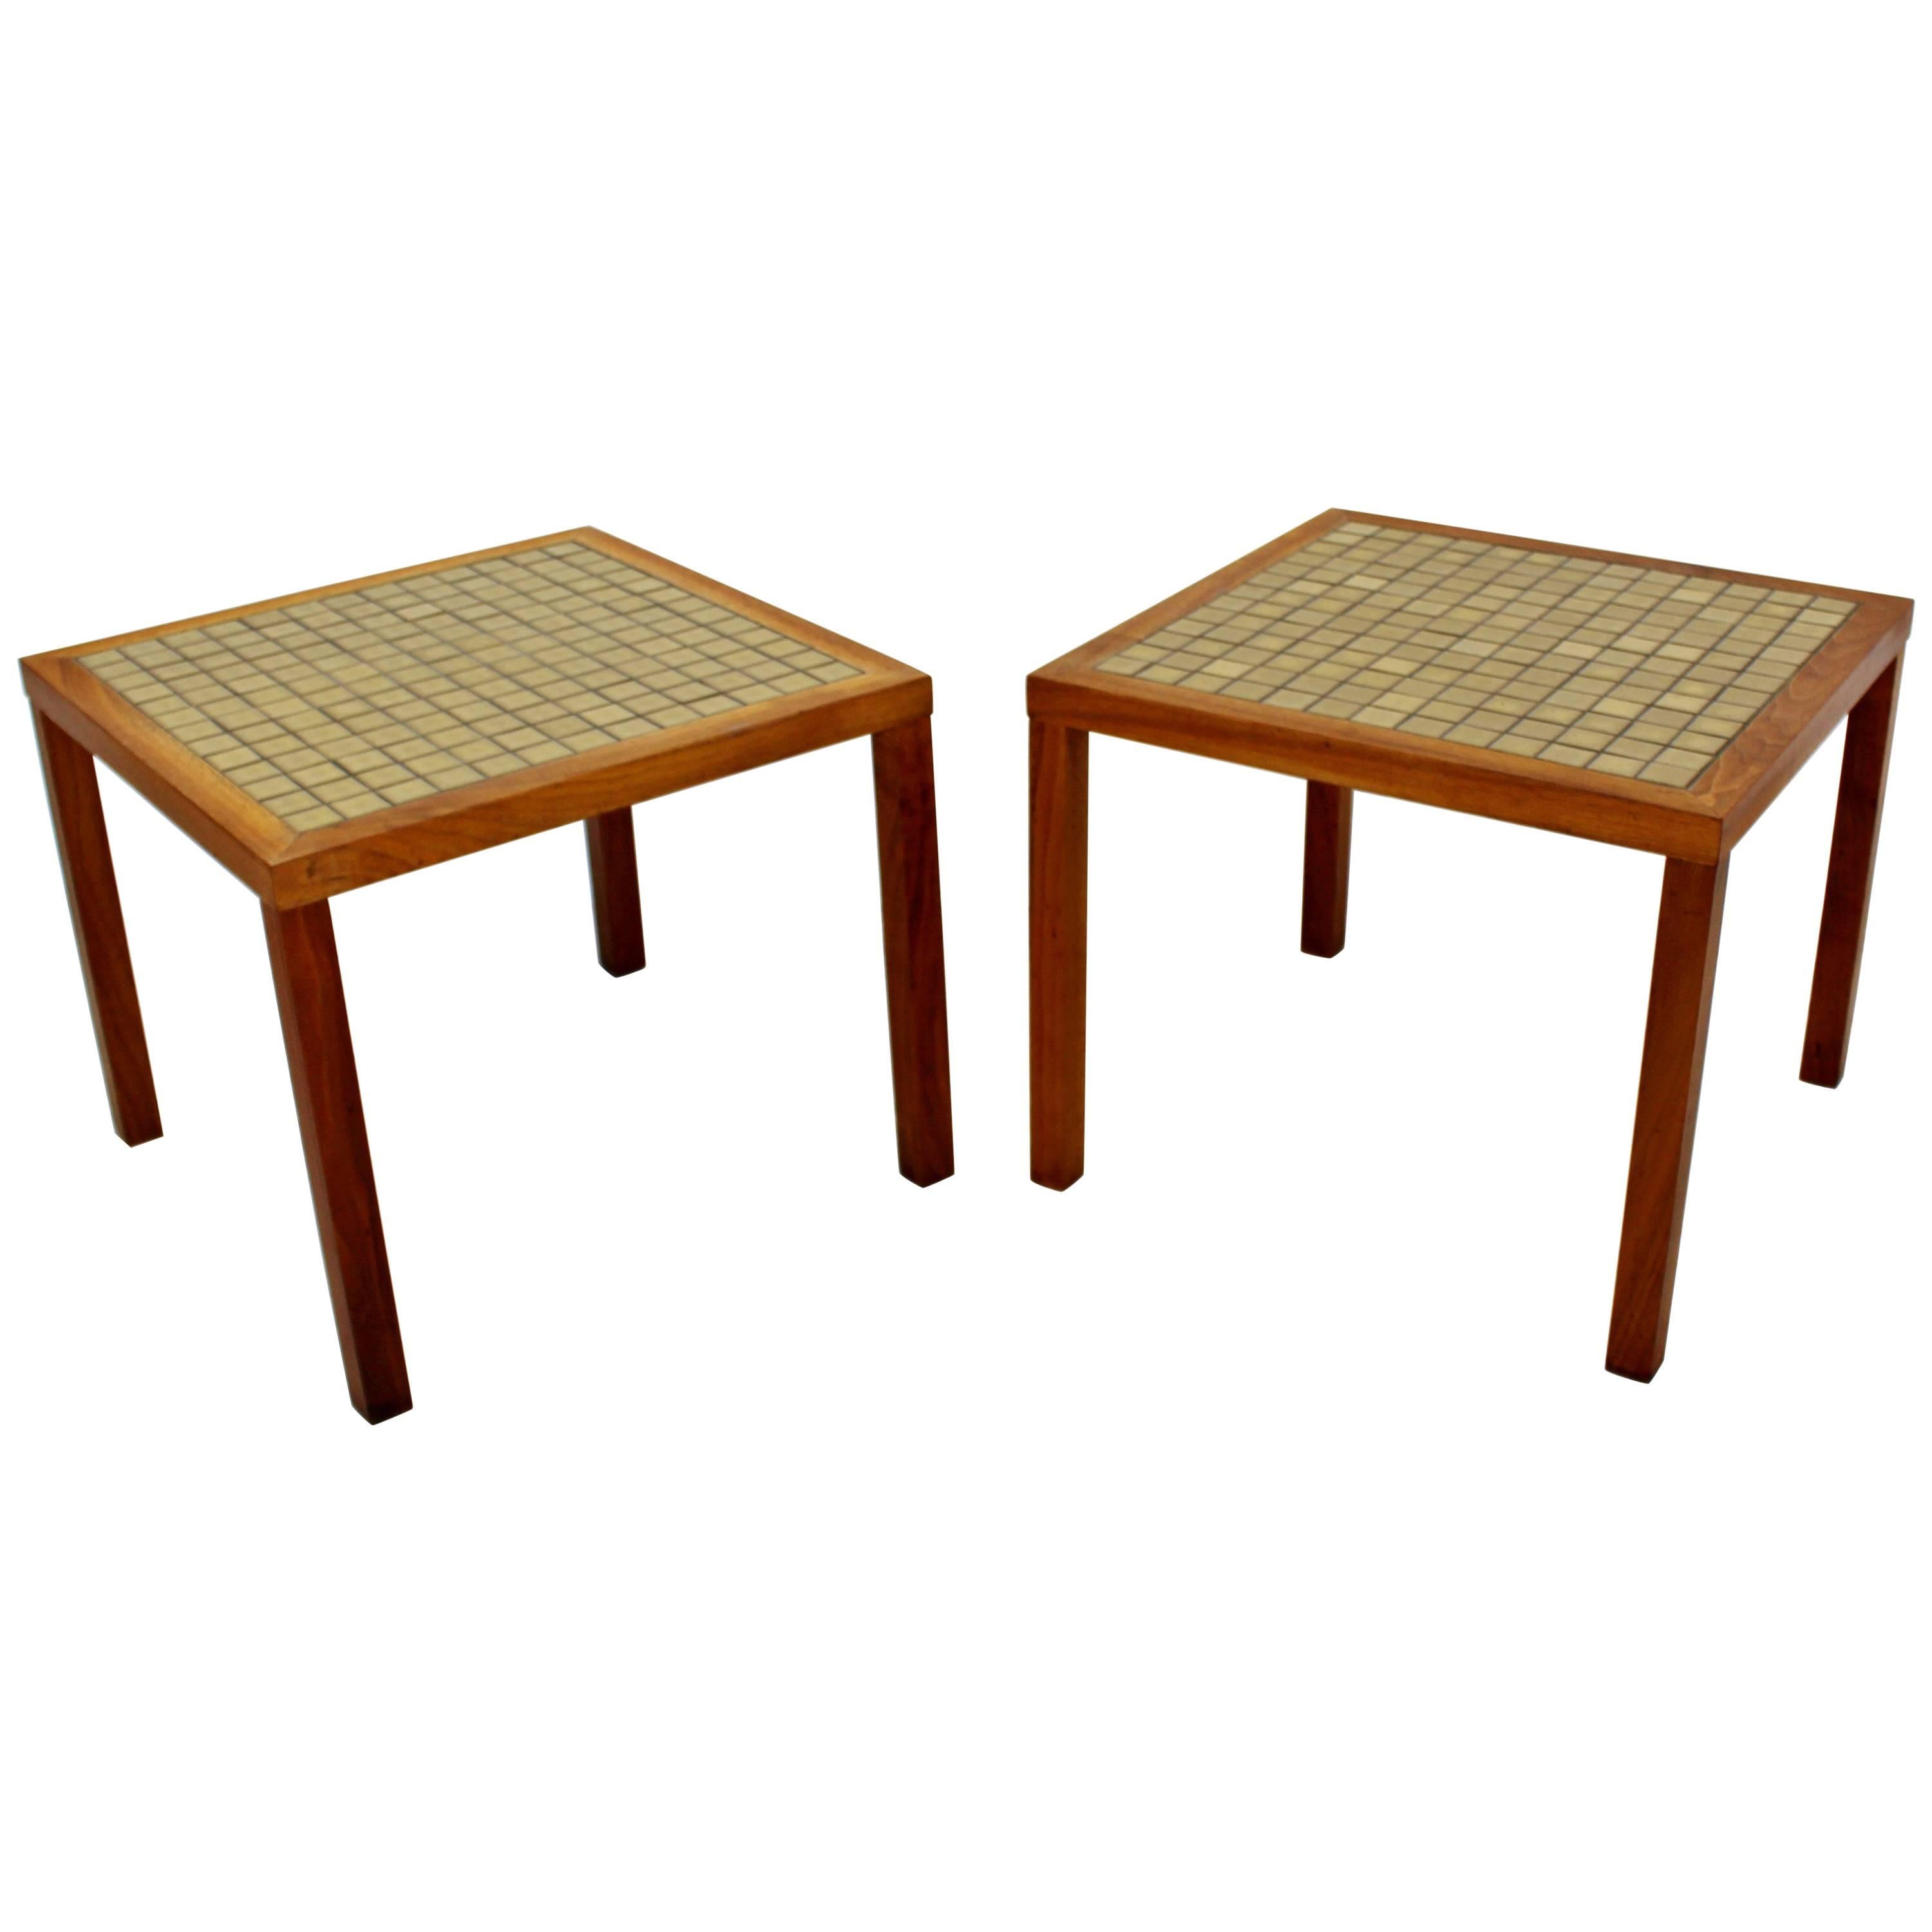 Mid-Century Modern Pair of Martz Green Tile-Top and Walnut Side End Tables 1960s